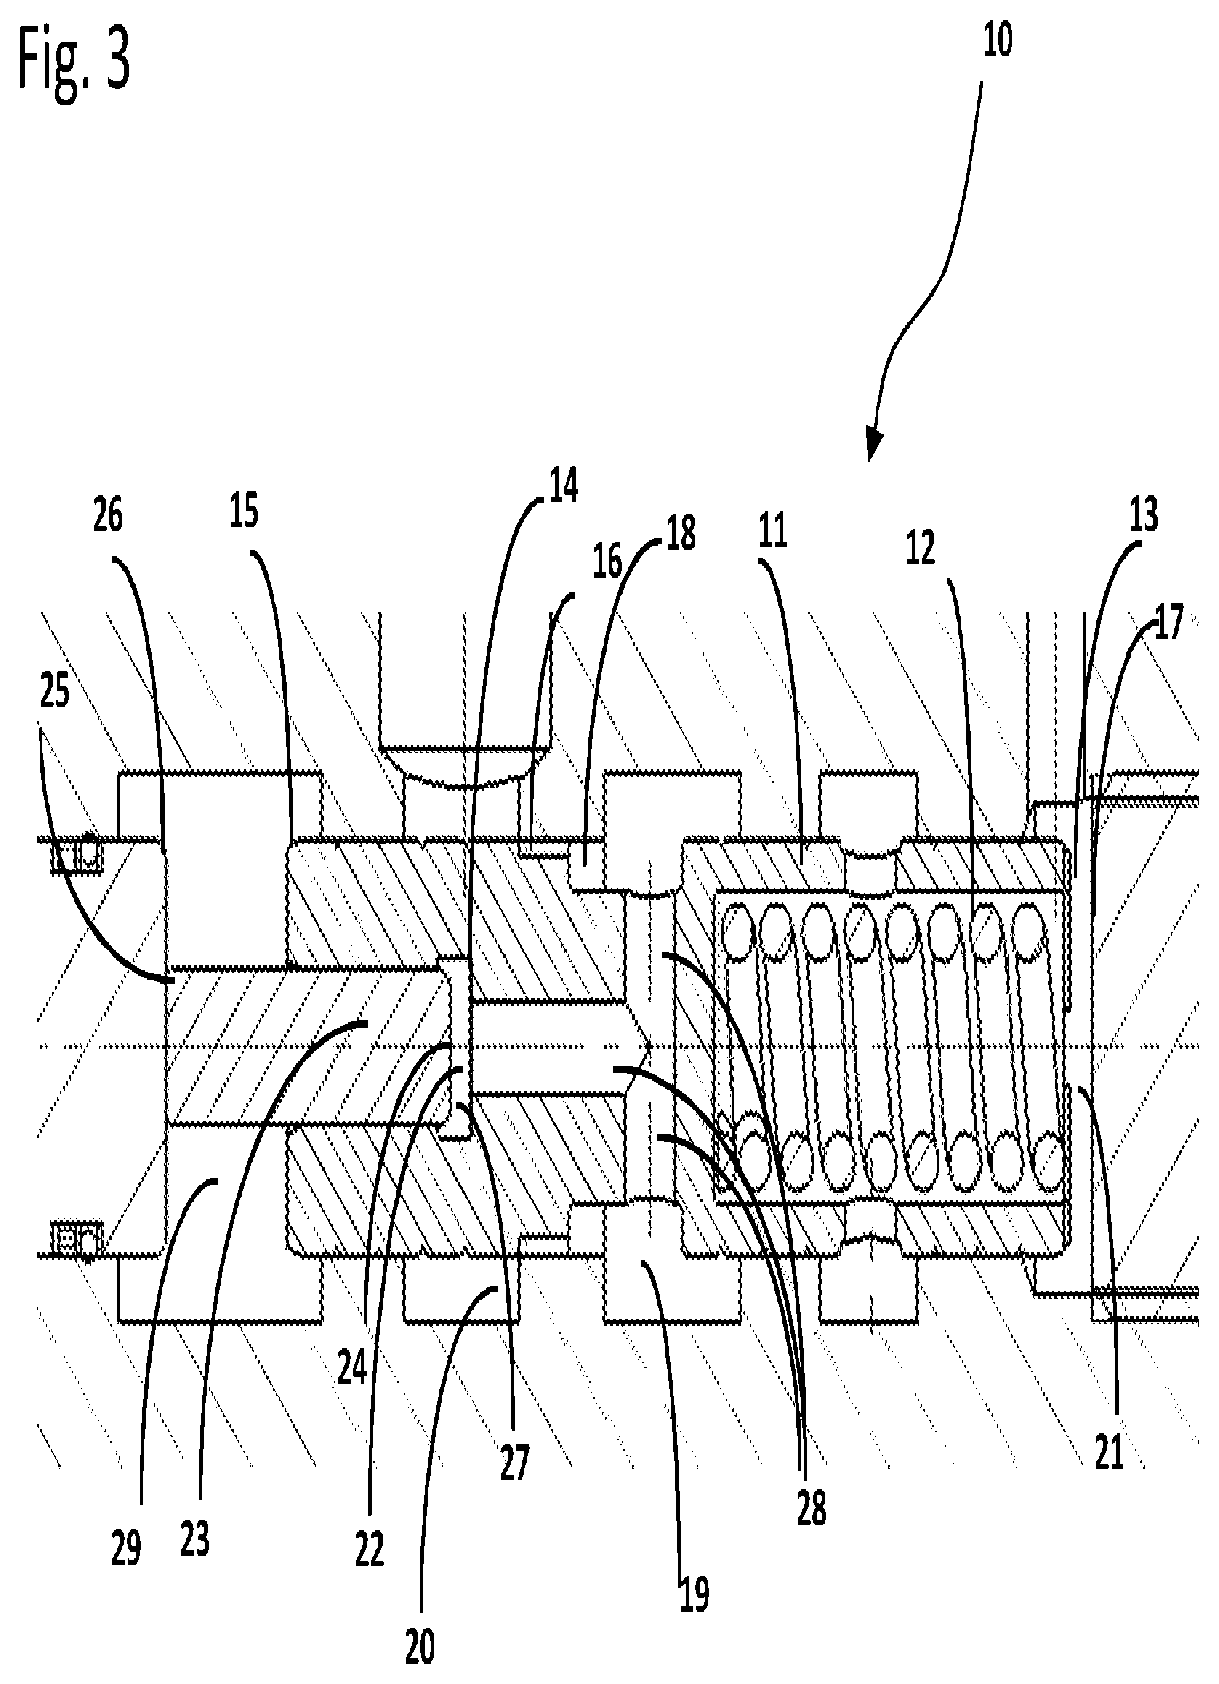 Hydraulic distributor with valve device with active discharge in load sensing circuits